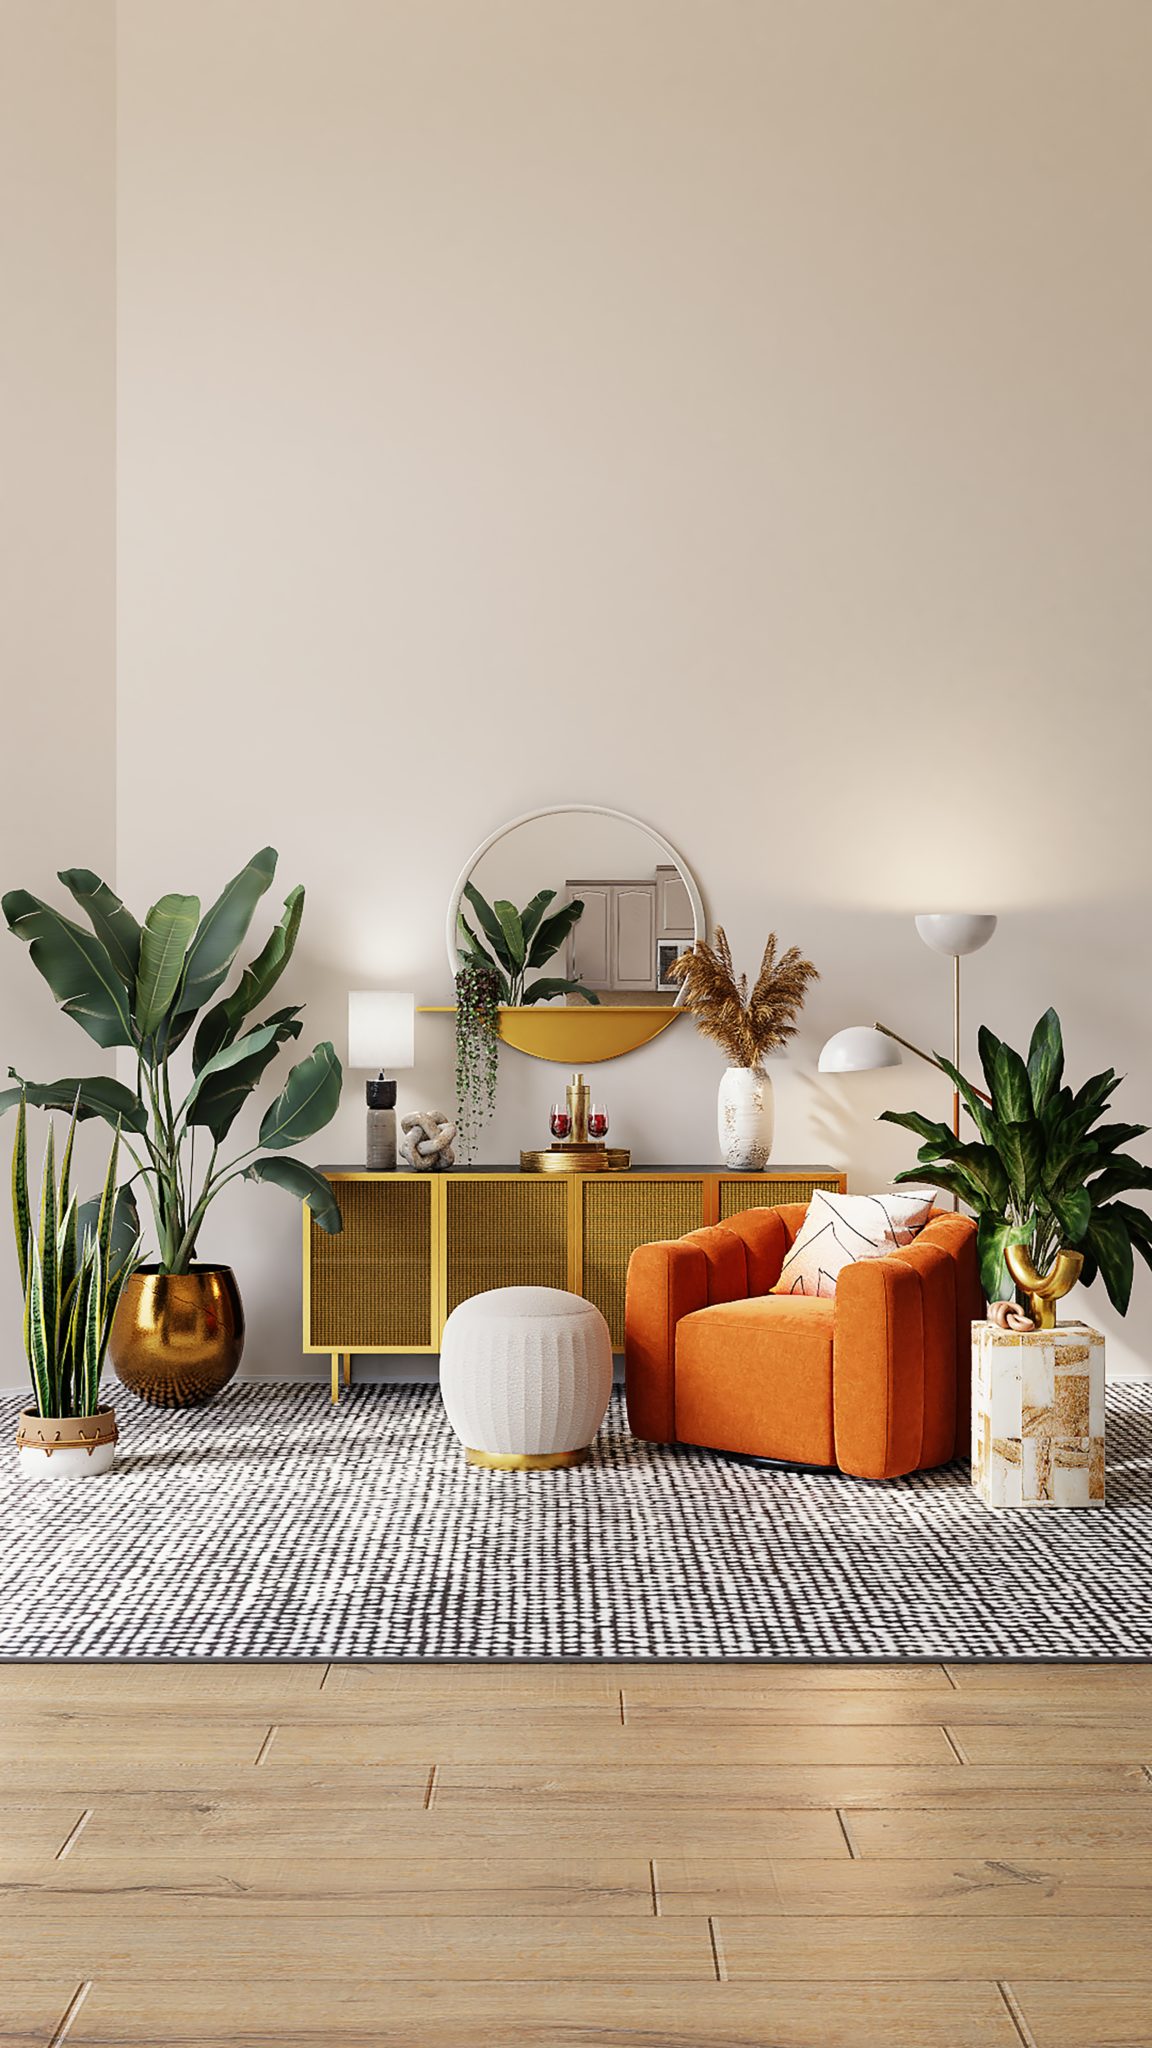 6 Ways To Add Flair To Your Apartment